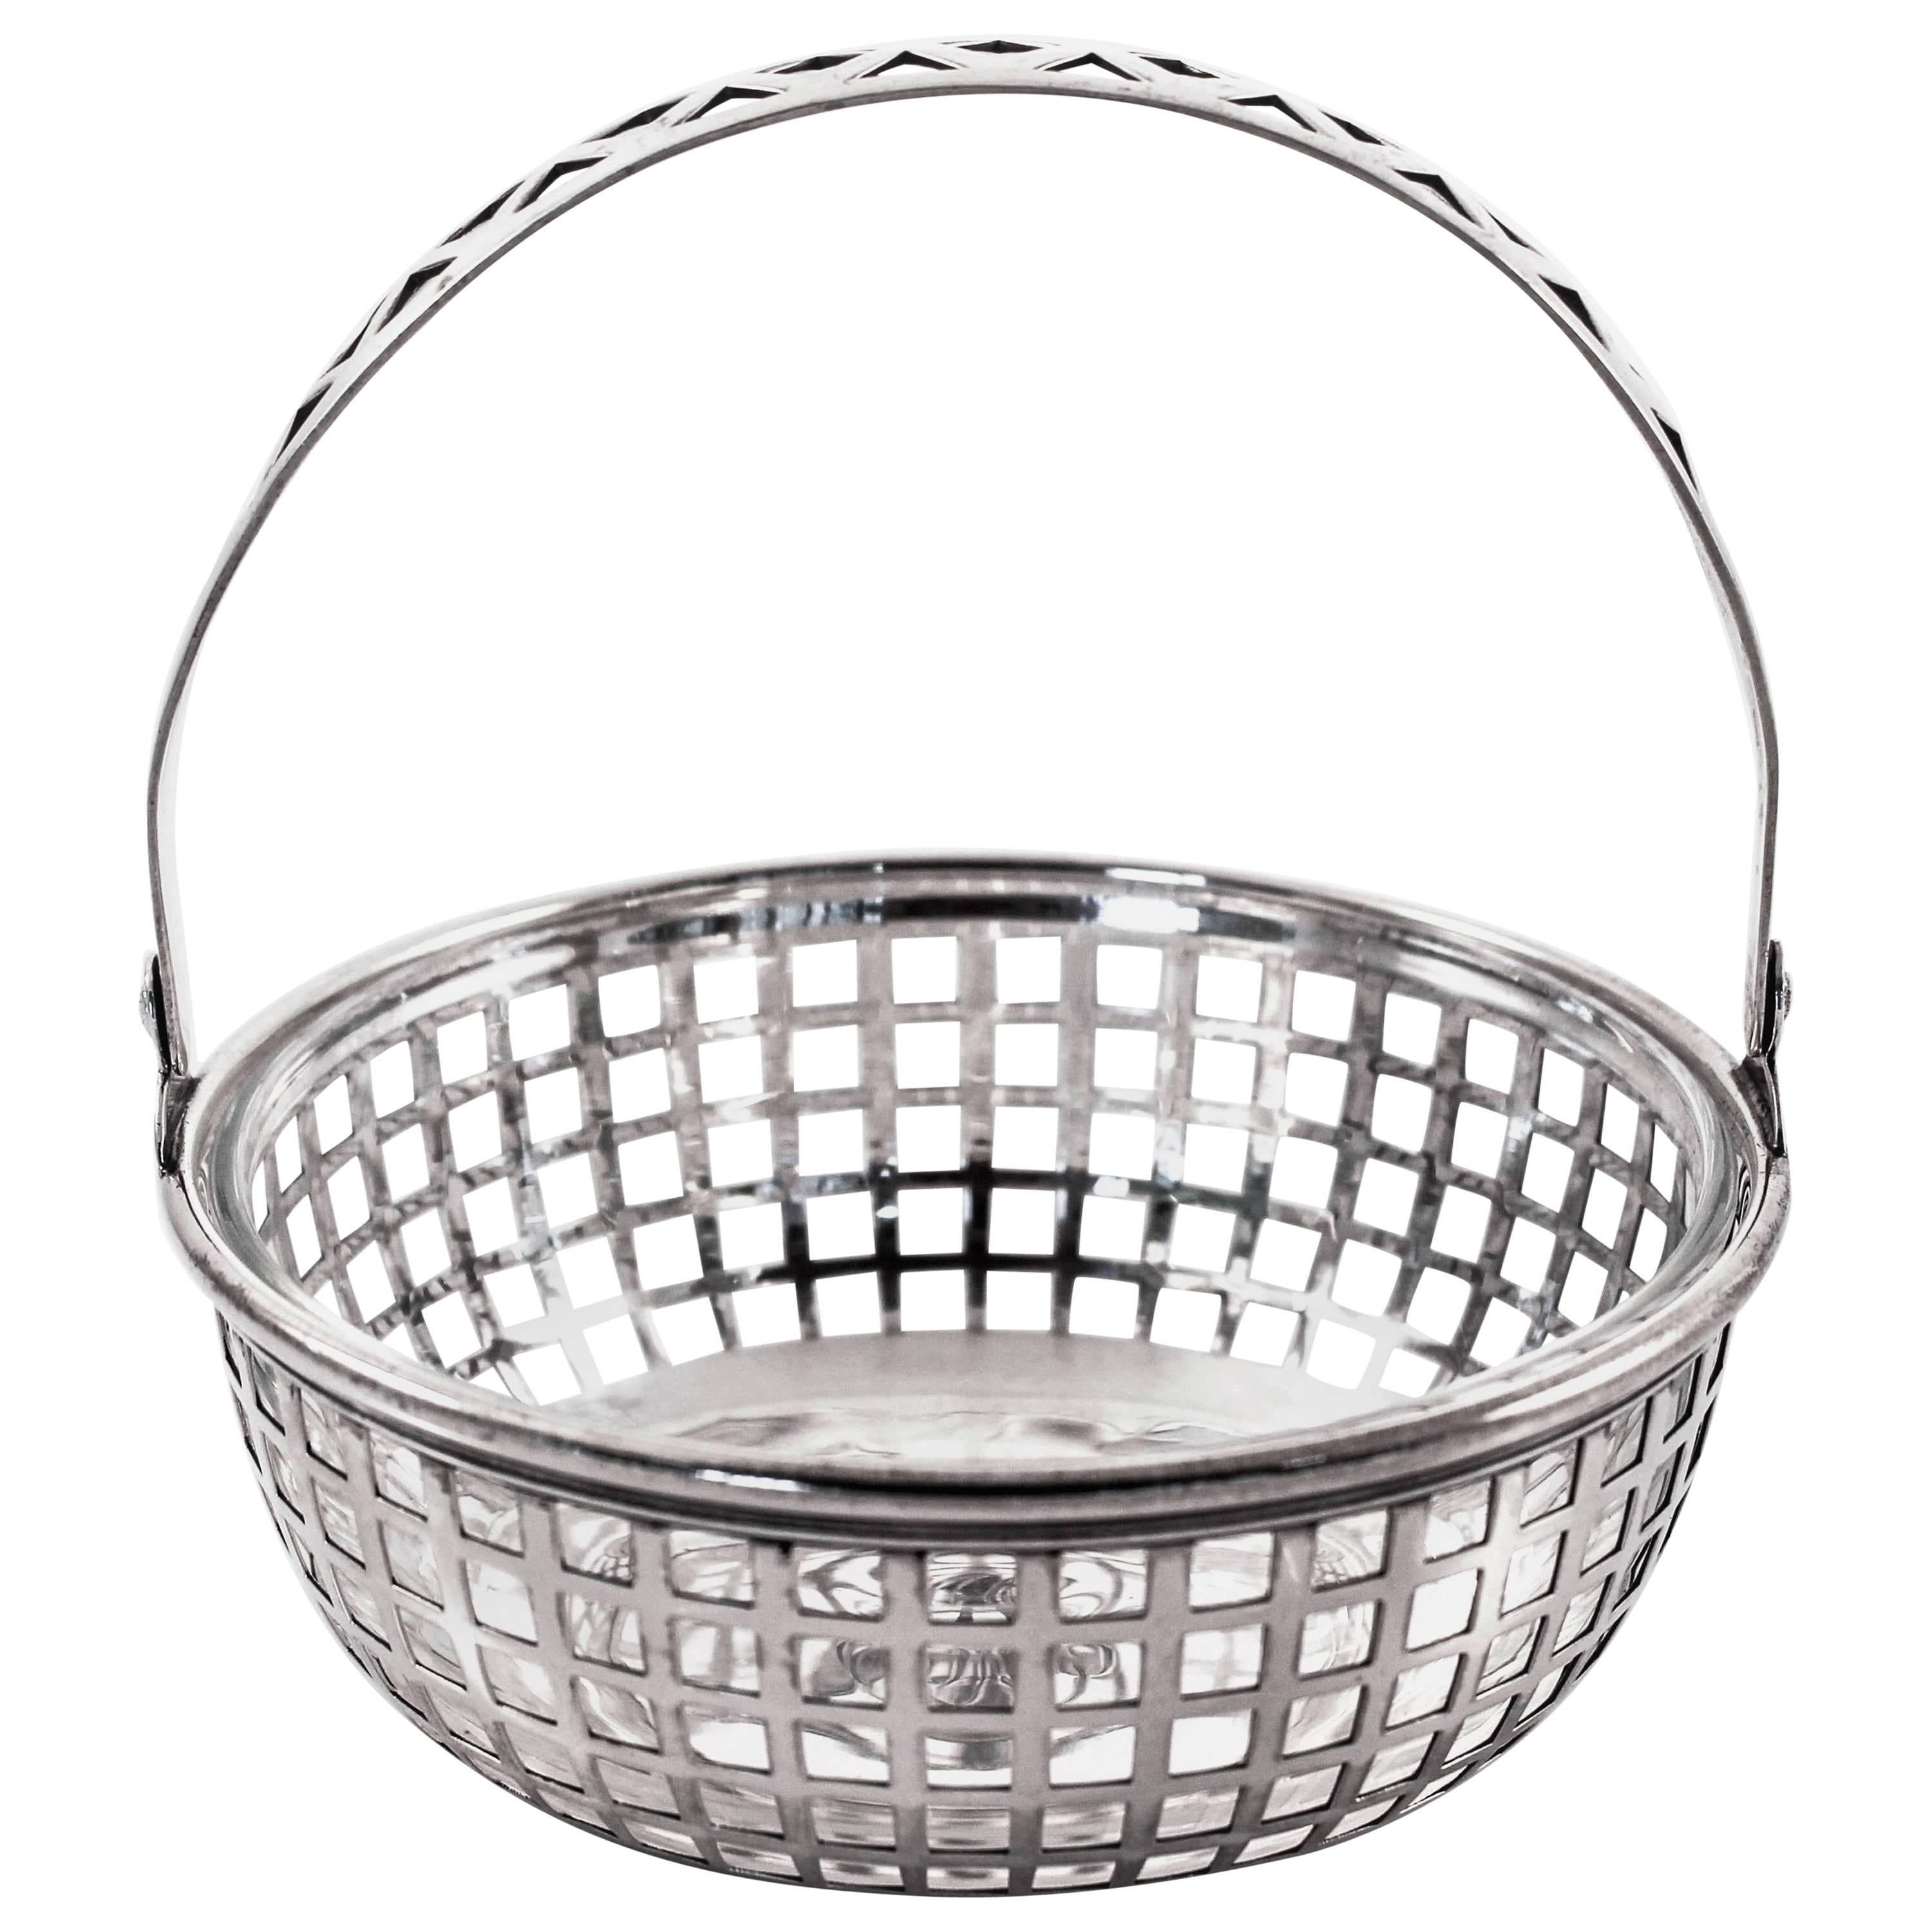 Basket with Glass Liner For Sale